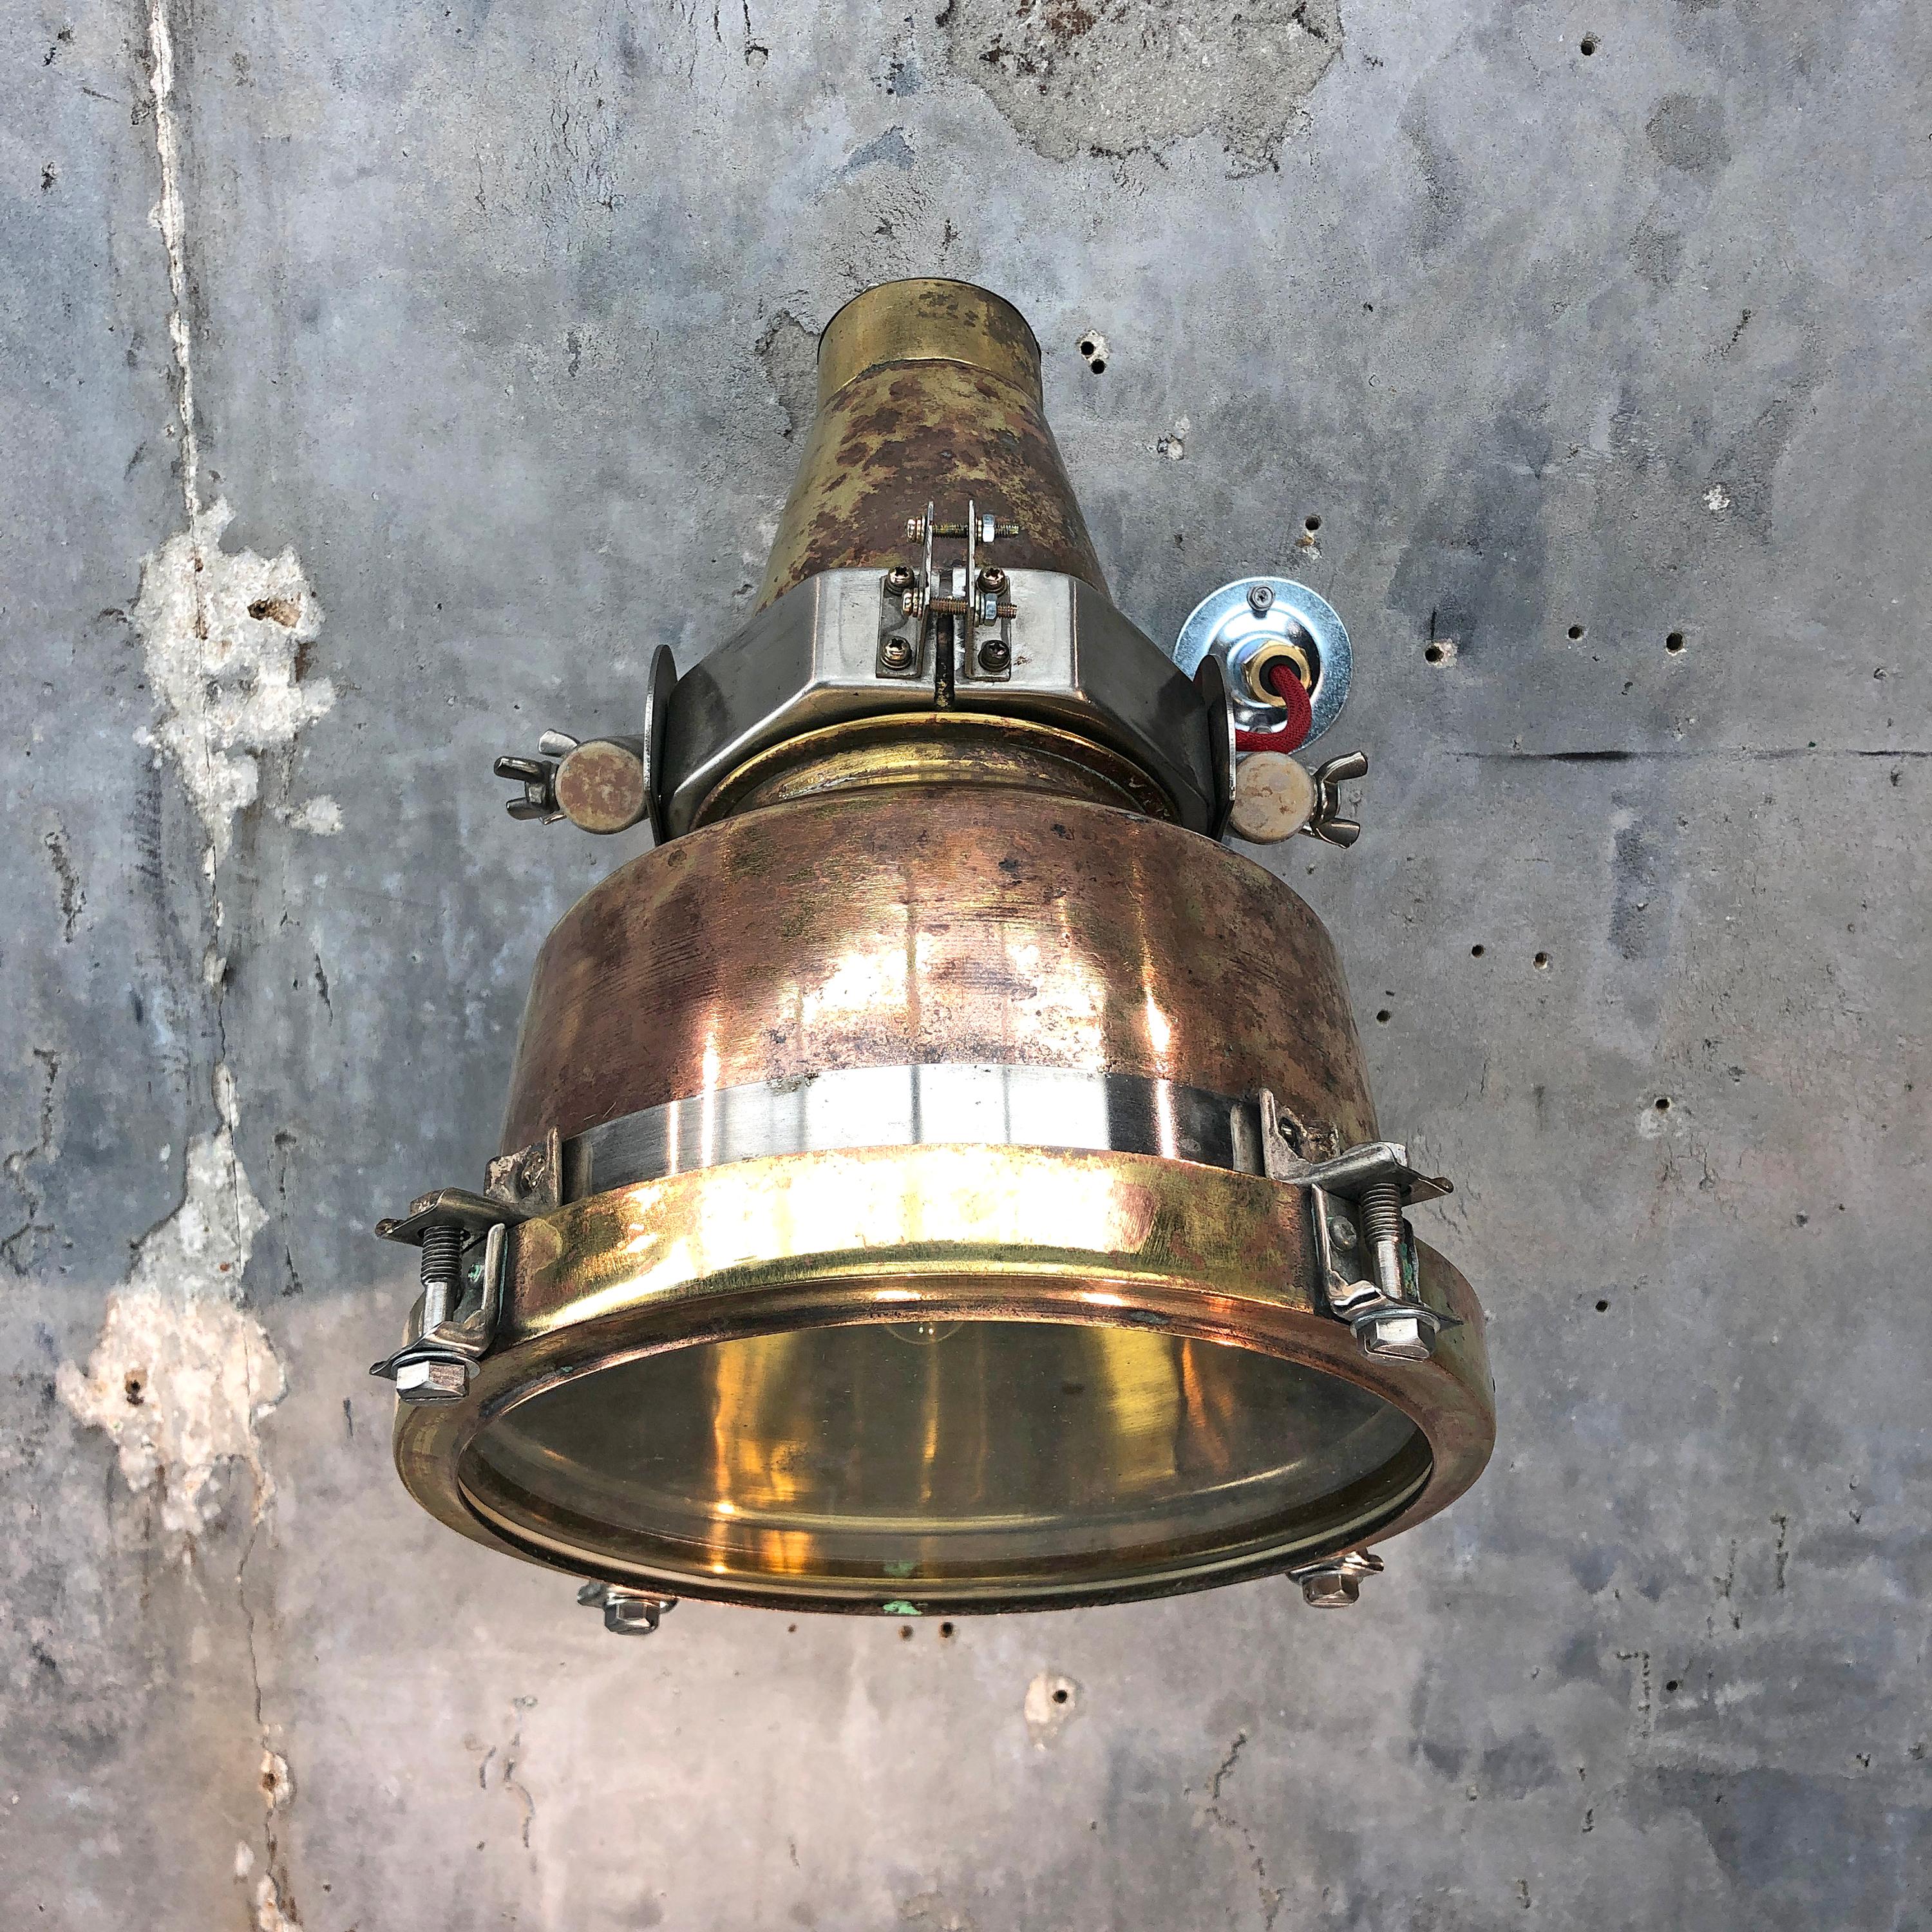 A great compact vintage Industrial wall lighting solution made from brass and aluminum. They can be used as uplighters, downlighters and Directional architectural lighting both indoor and outdoor.

Originally these would have highlighted smaller